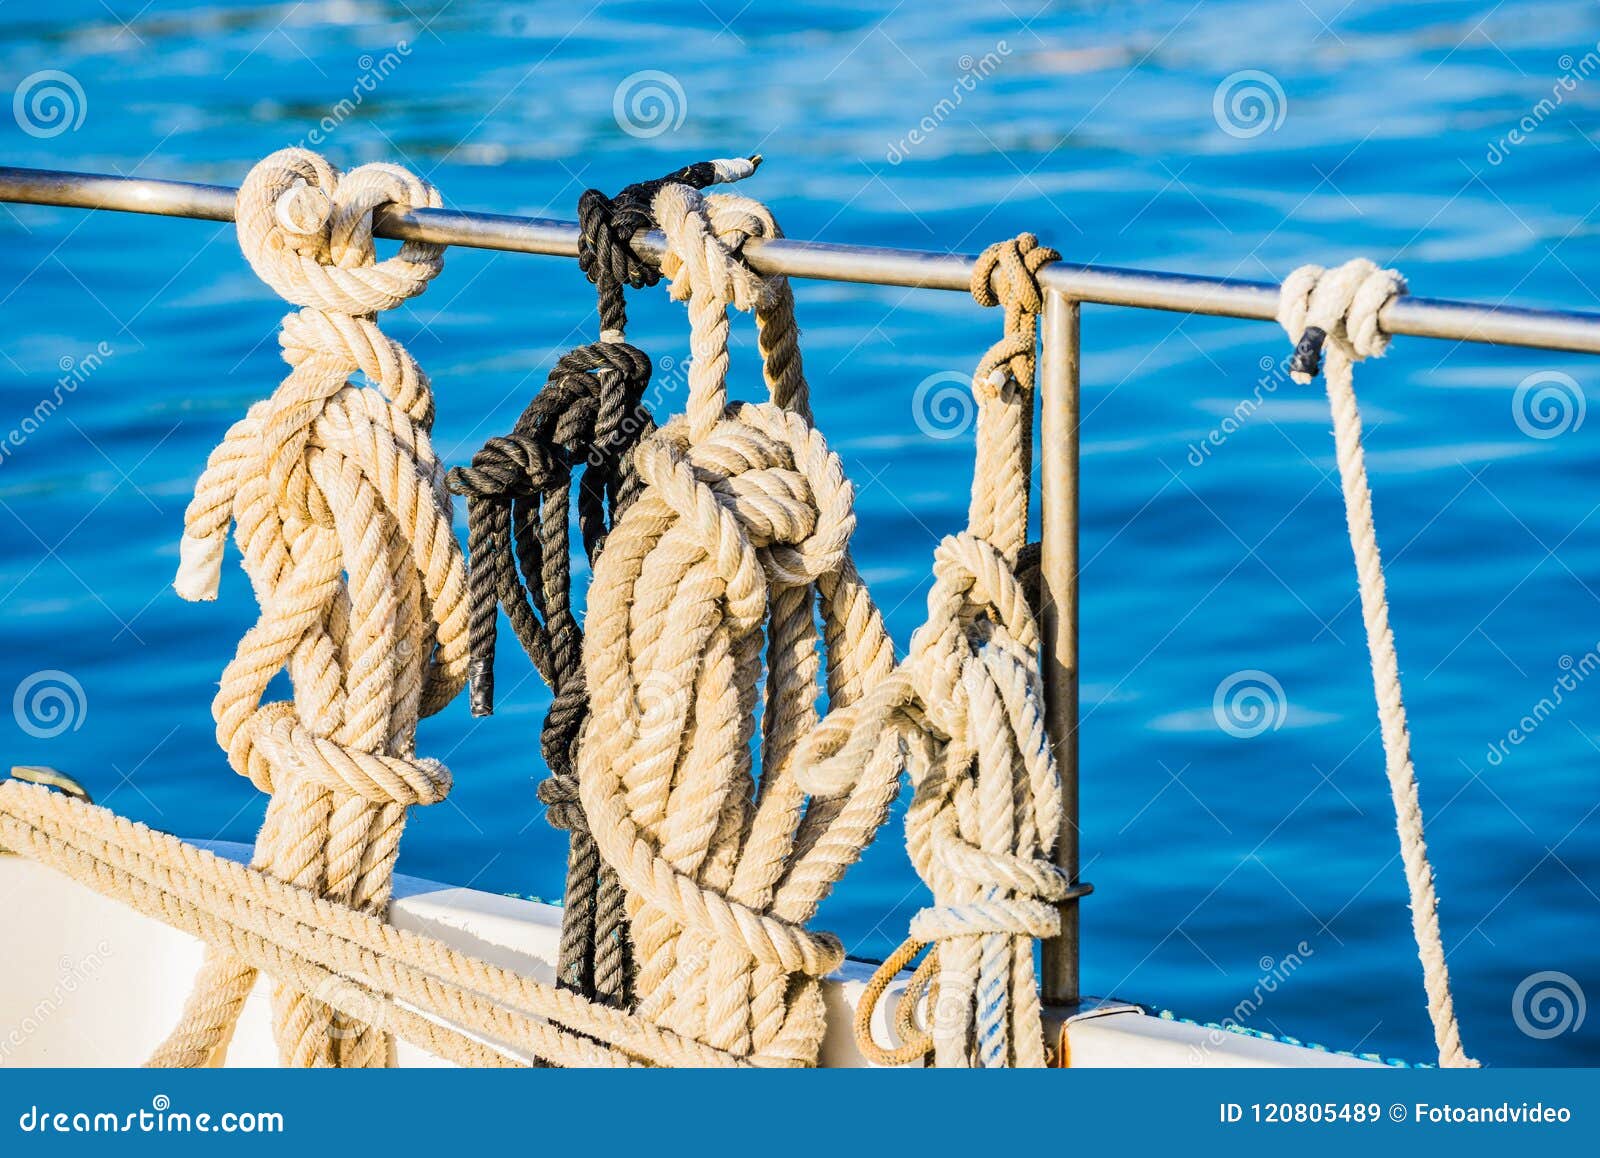 Nautical Ropes Knotted on Railing of Sailboat Deck Stock Image